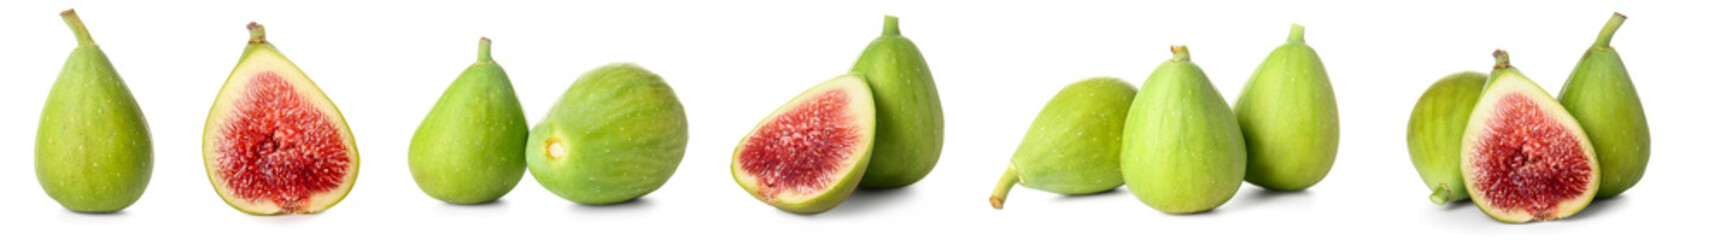 Wall Mural - Set of fresh green figs on white background